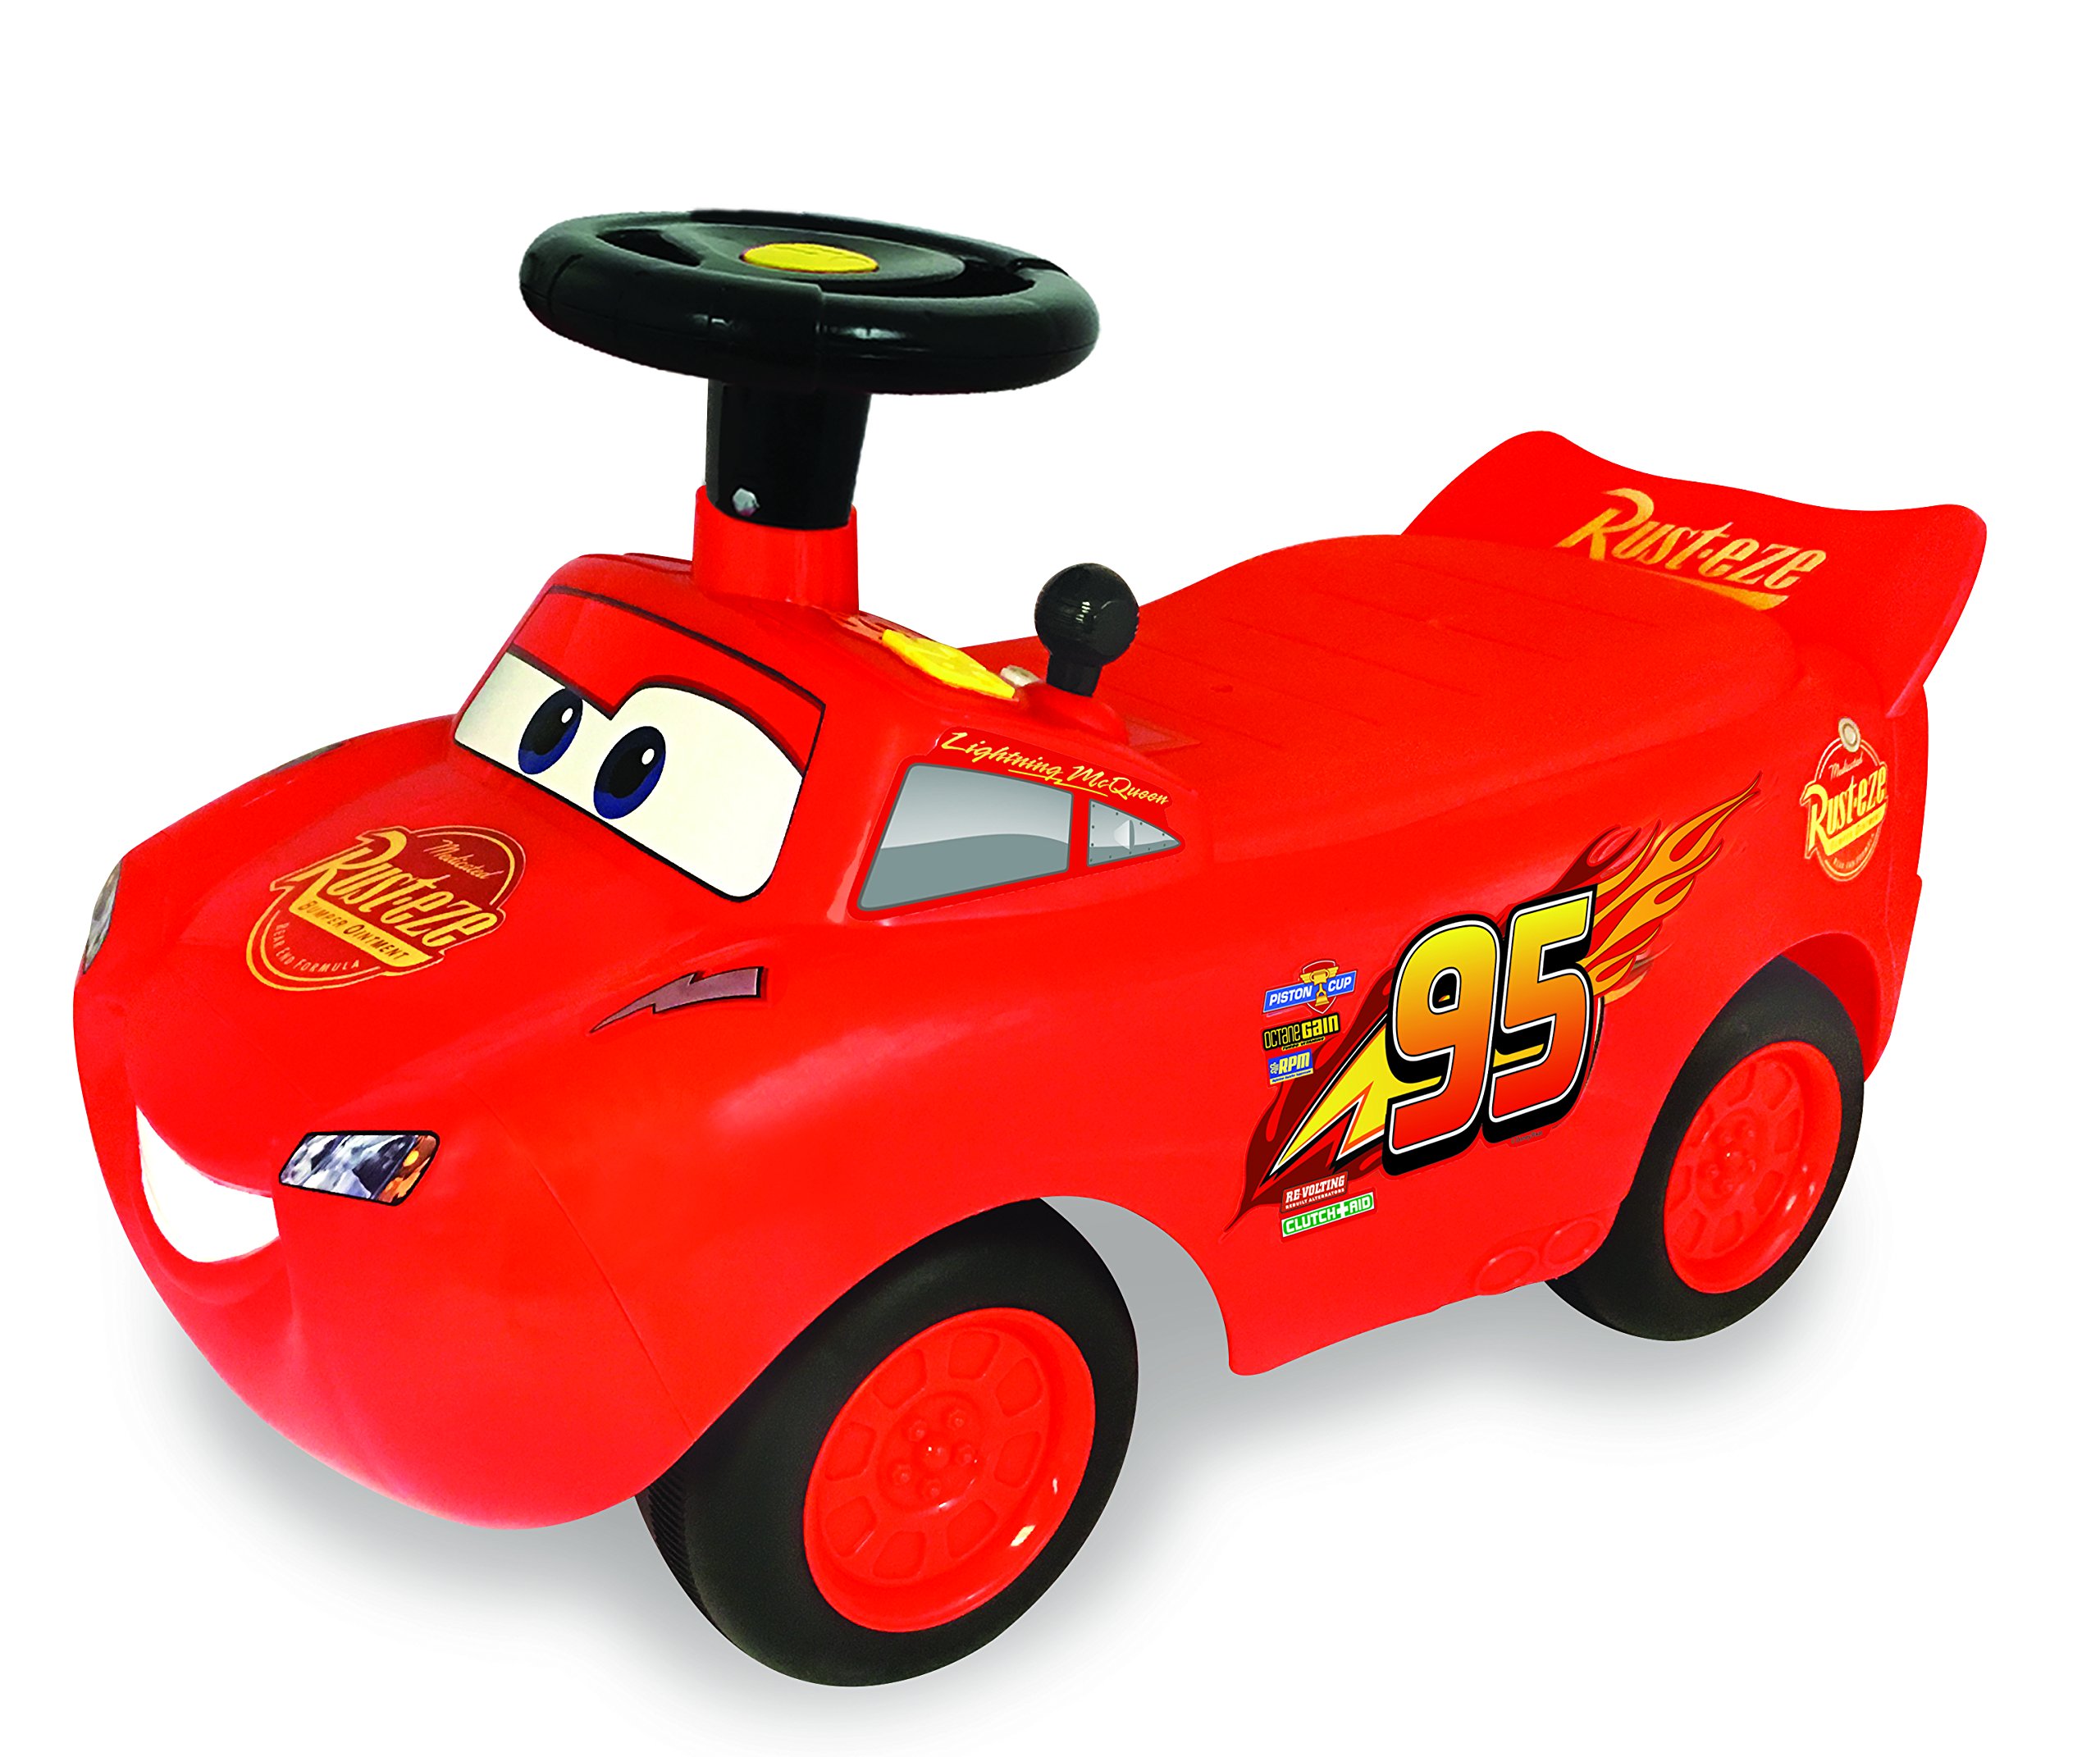 Ride-On Car Toys: The Ultimate Guide for Kids’ Fun and Safety